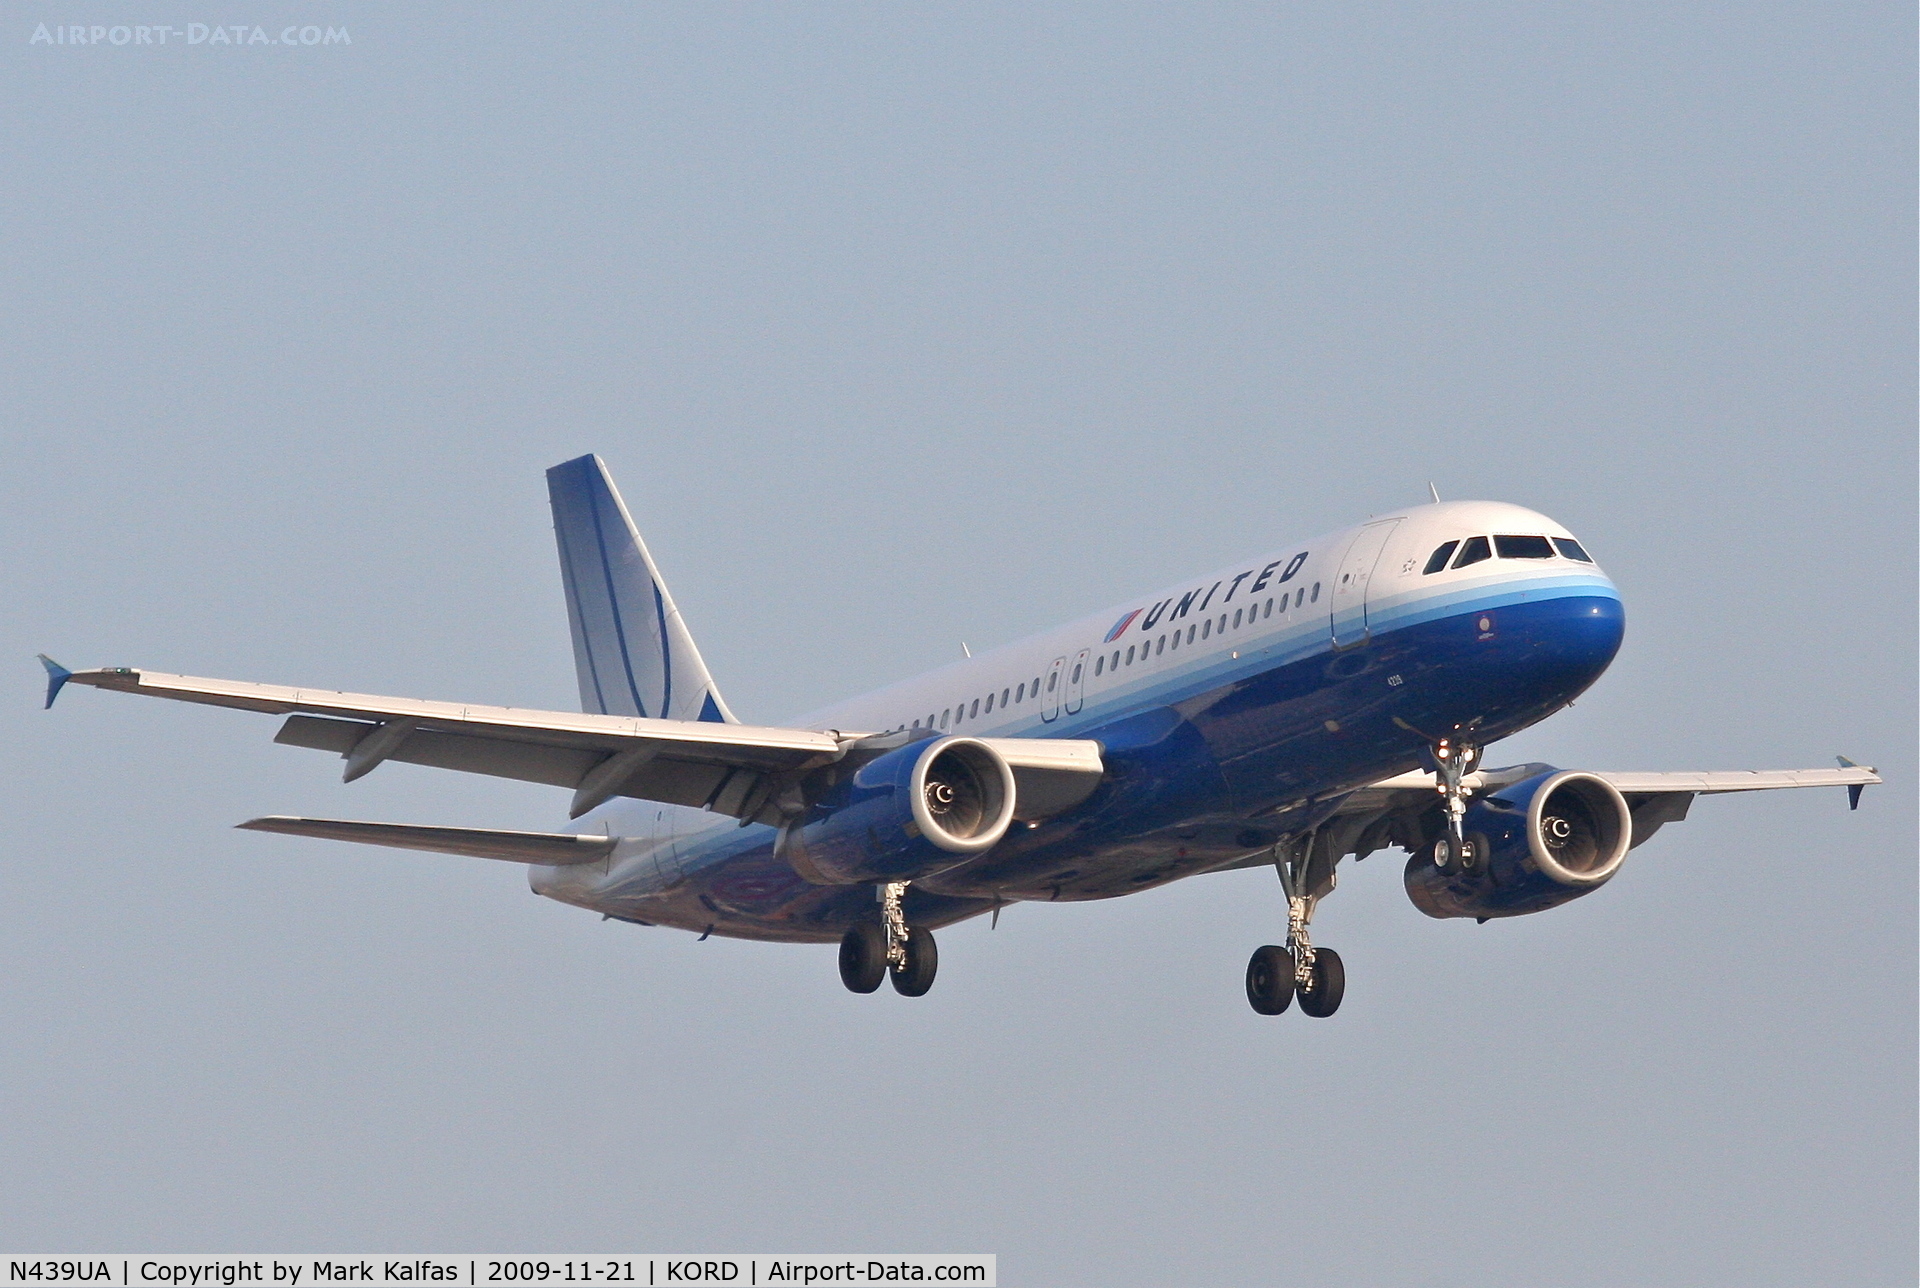 N439UA, 1997 Airbus A320-232 C/N 683, United Airlines A320-232, UAL537 arriving from KBOS, short final 22R KORD